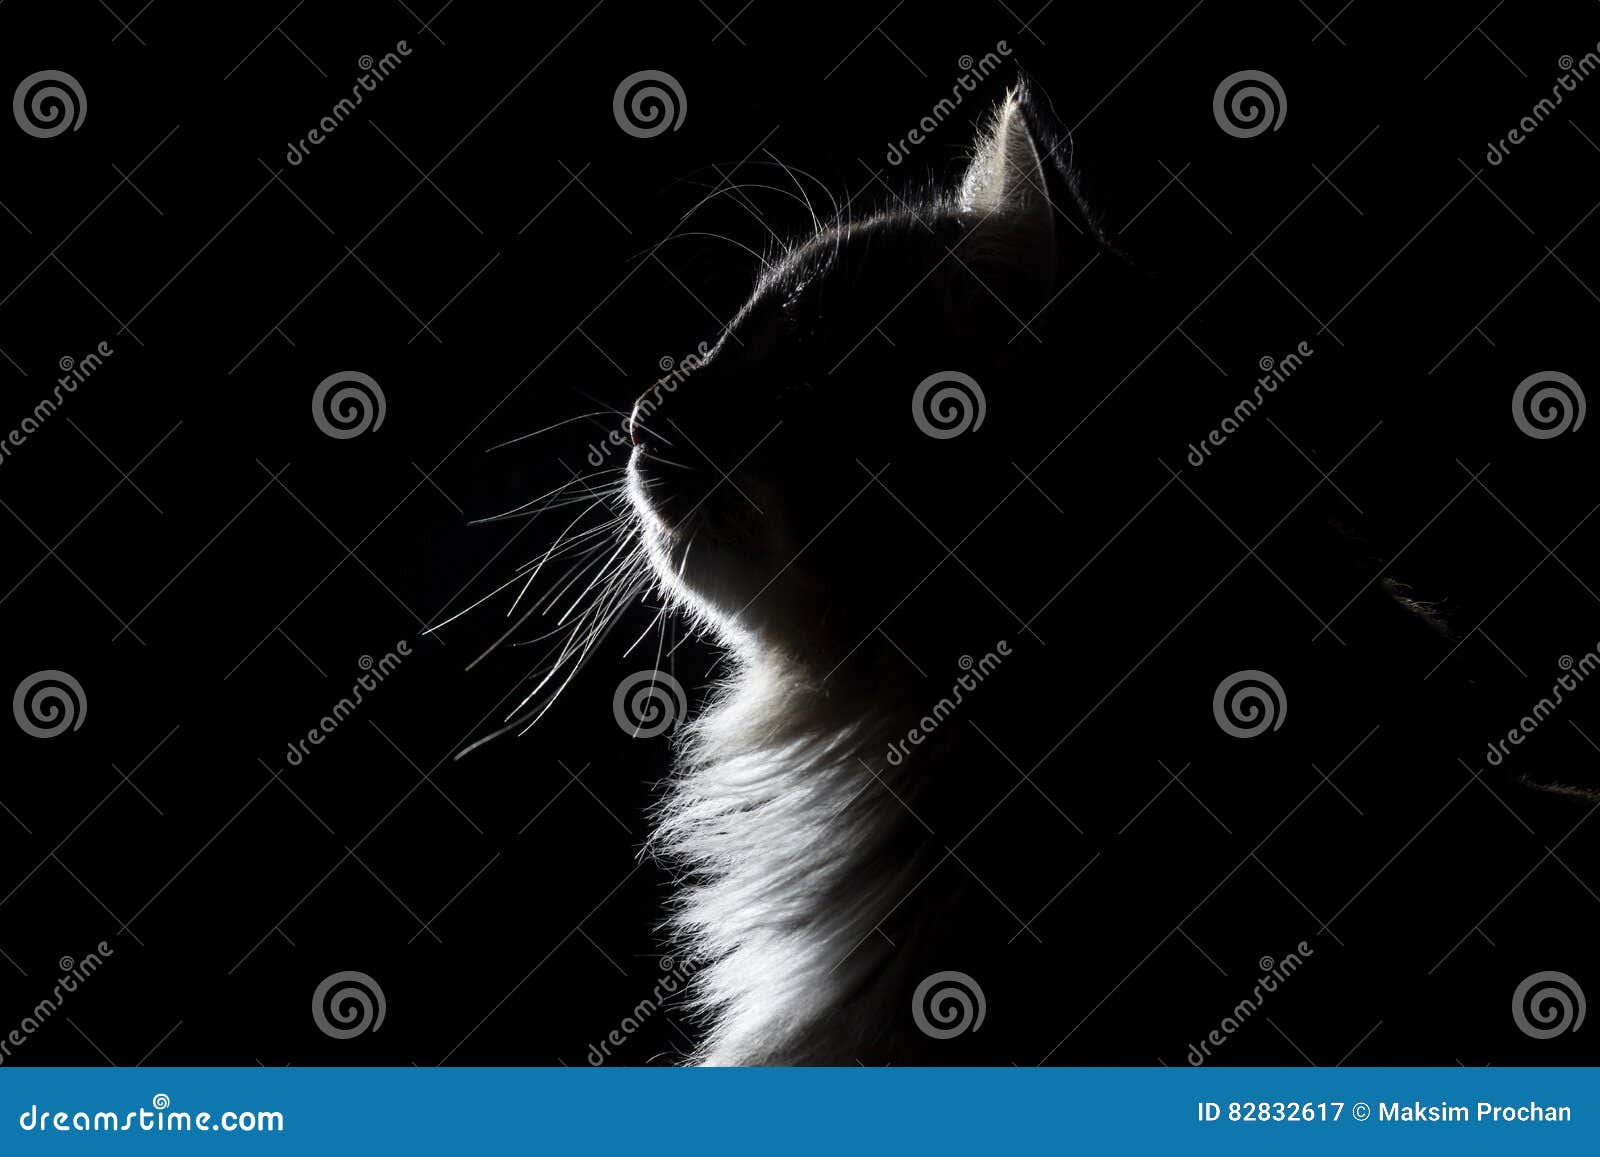 Outline Silhouette Portrait Of Beautiful Fluffy Cat On A Black